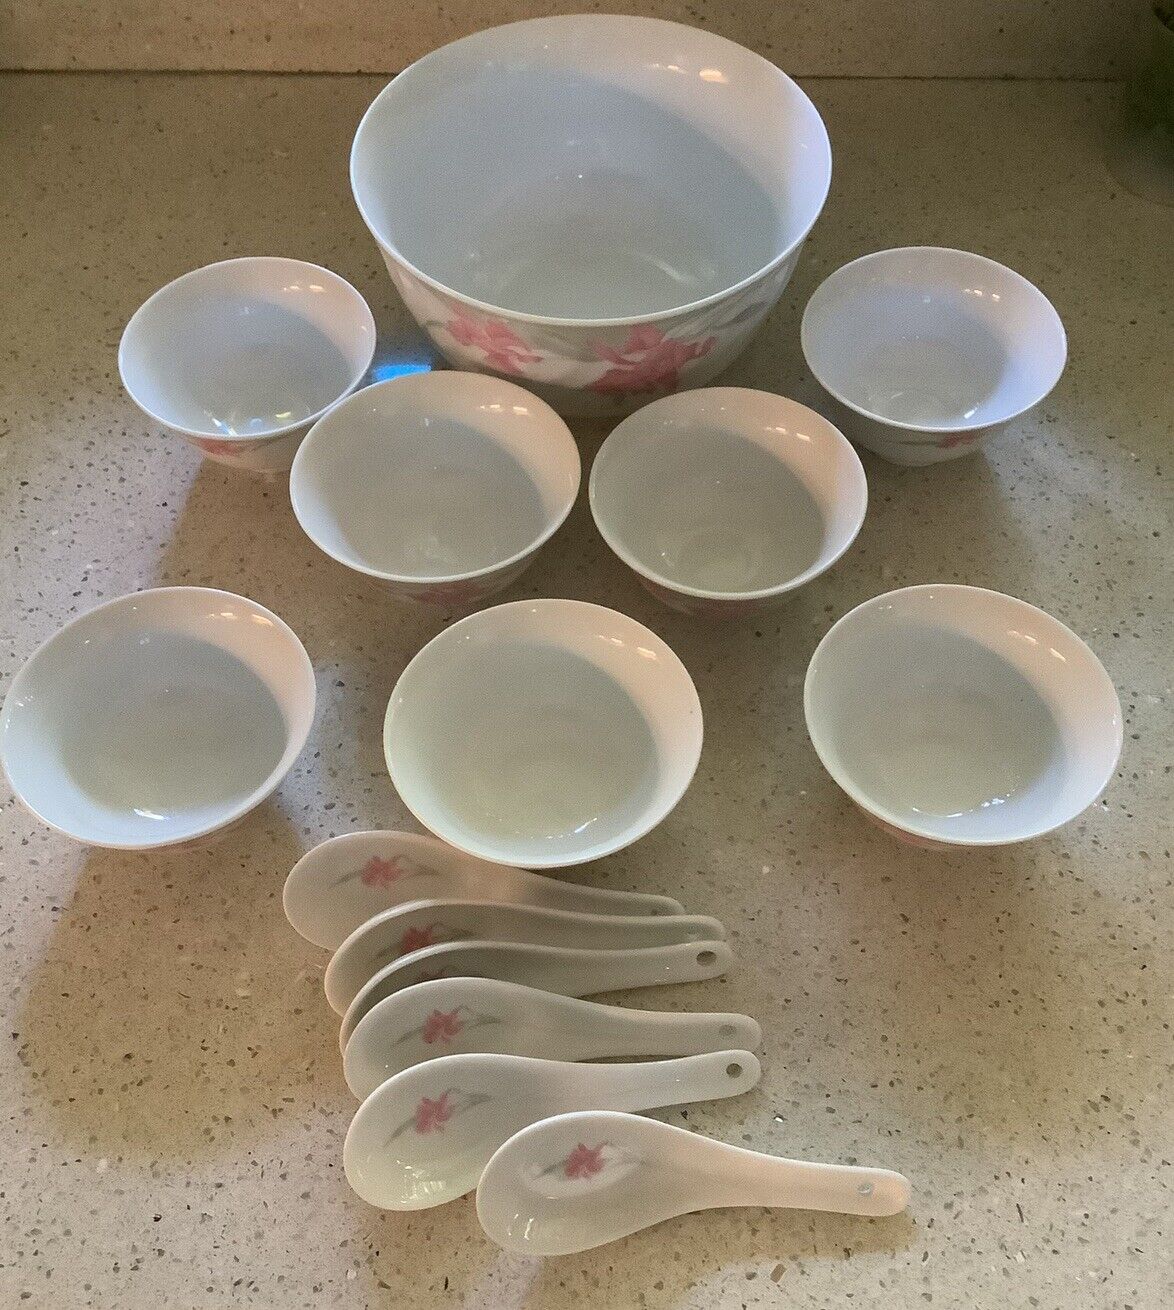  1 Large, 7 Small Bowls, 6 Spoons,Pink Iris Design, Quality China